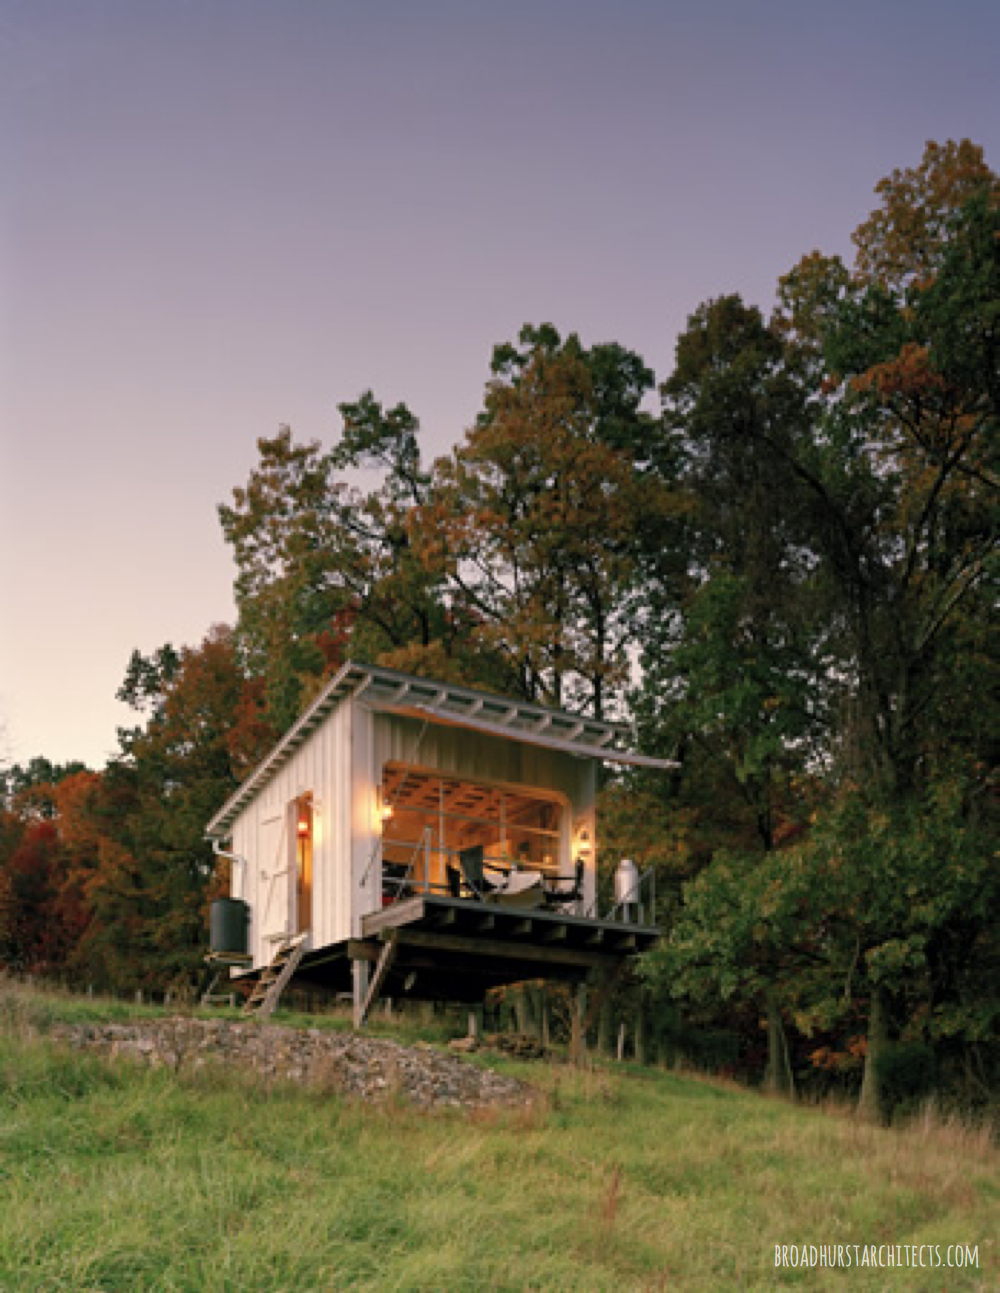 tiny house inspiration curated for lovefromberlin.net - http://www.broadhurstarchitects.com/residentialarchitecture/architecture_03.html